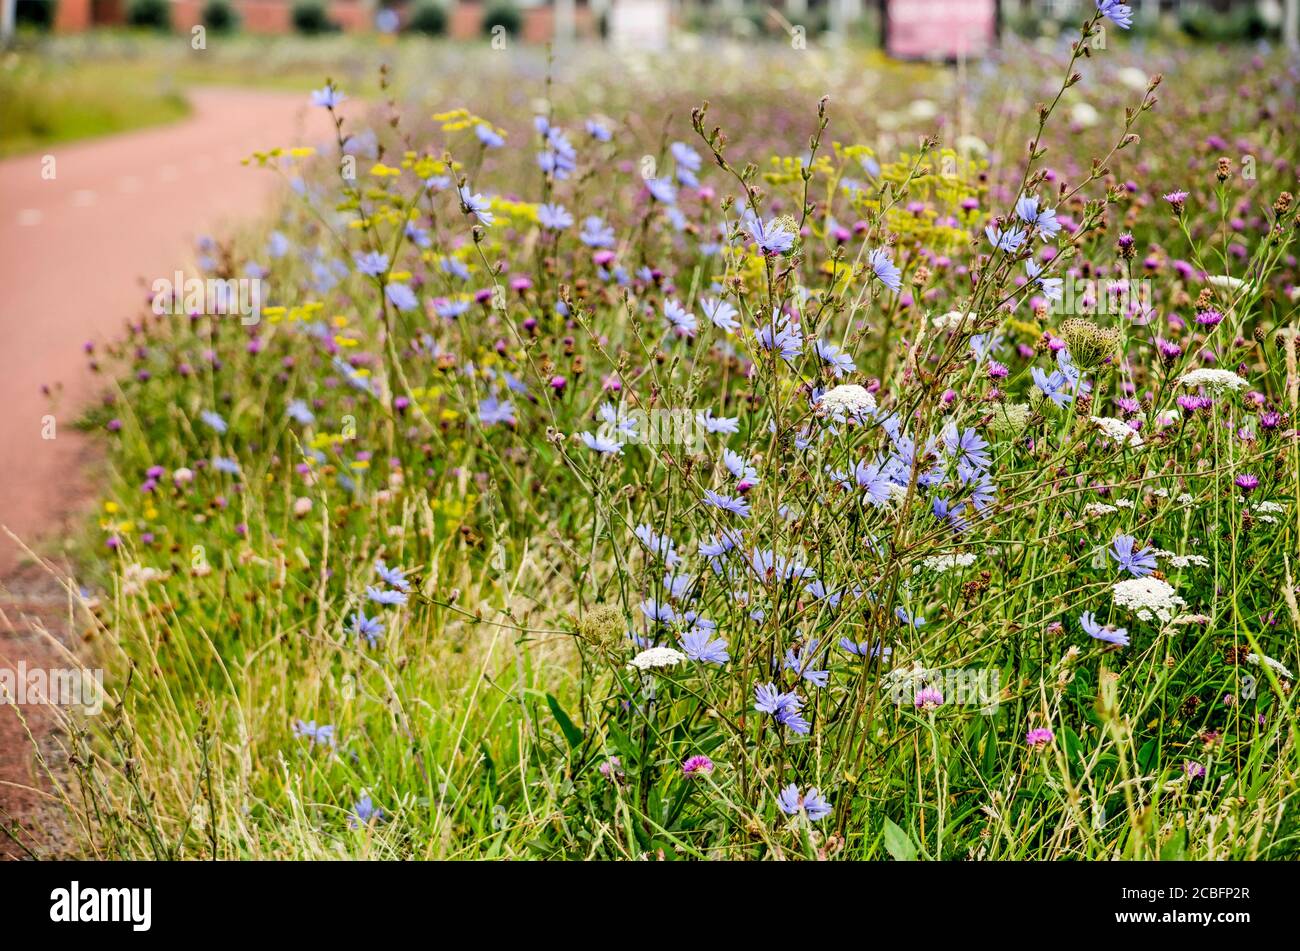 chicory and other wildflowers growing in abundance by the side of a red asphalt bicycle lane  in summer in the town of Zwolle, The Netherlands Stock Photo